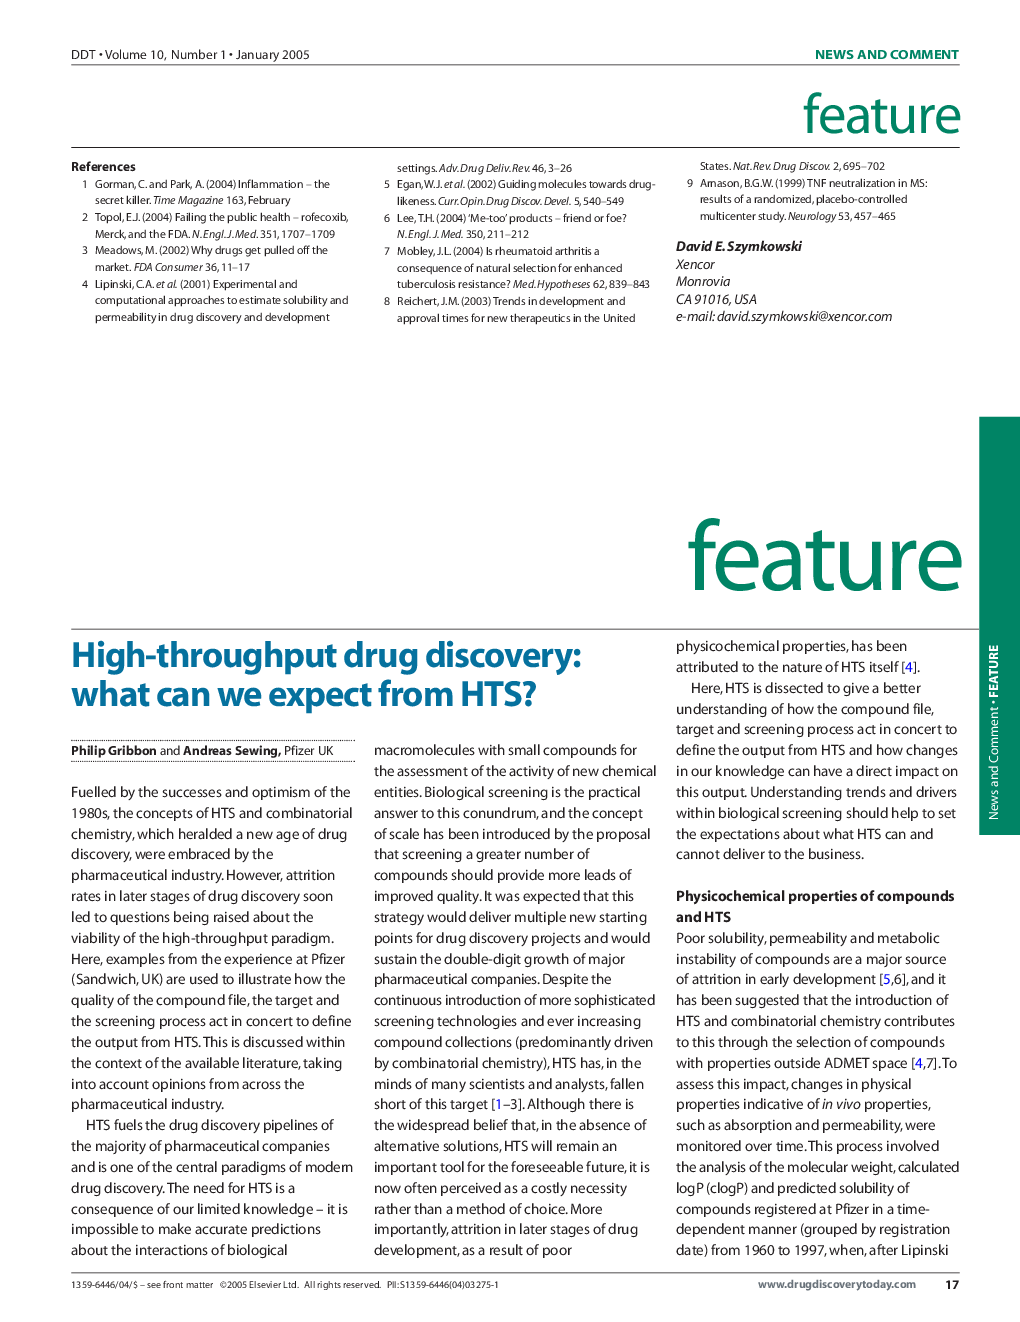 High-throughput drug discovery: What can we expect from HTS?